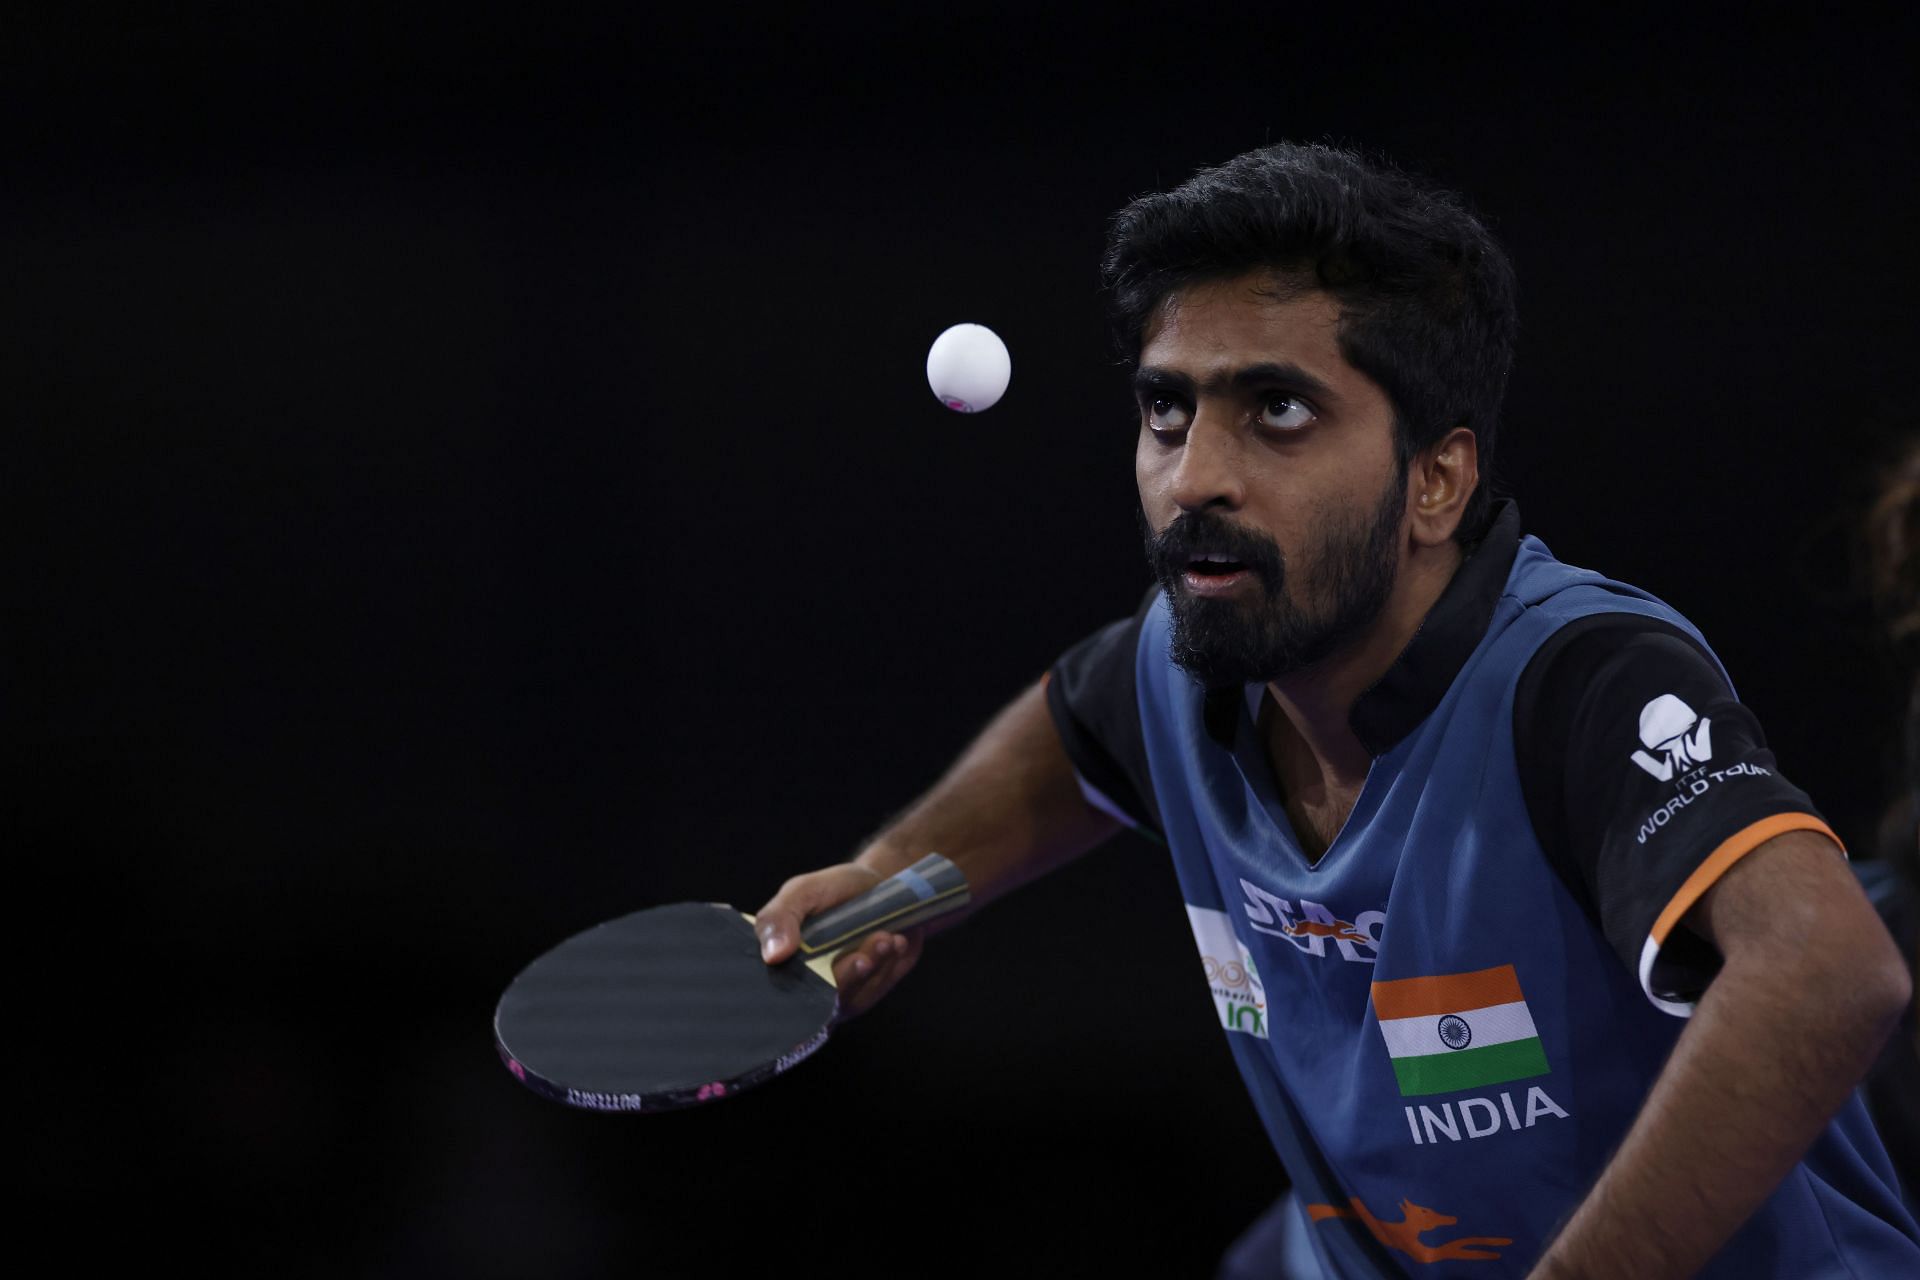 Indian table tennis player G Sathiyan. (PC: Getty Images)